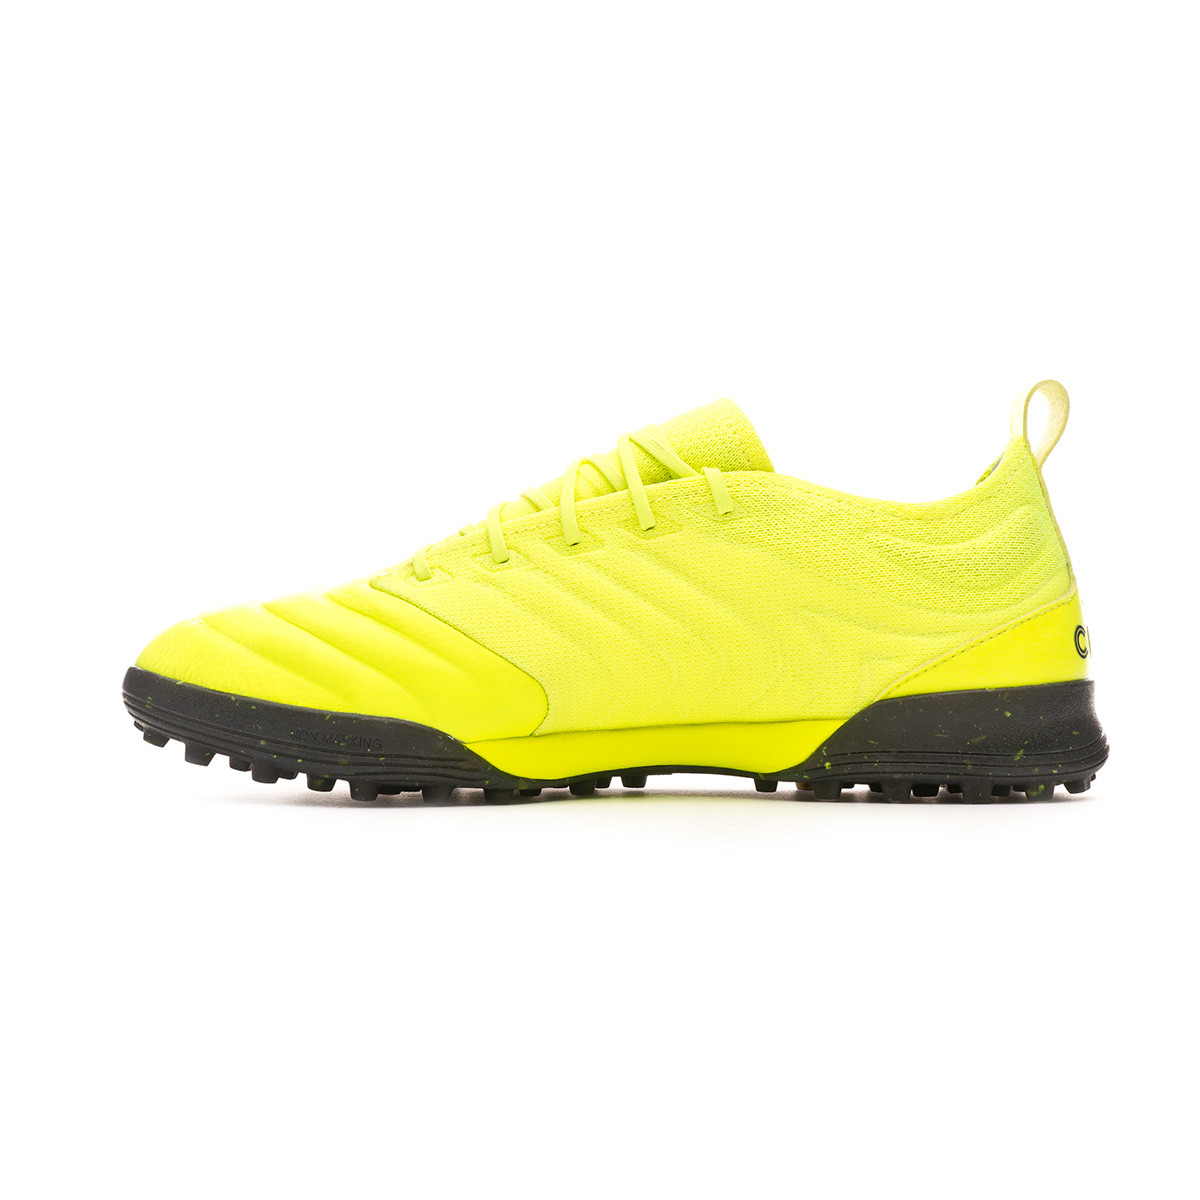 copa 19.1 turf shoes